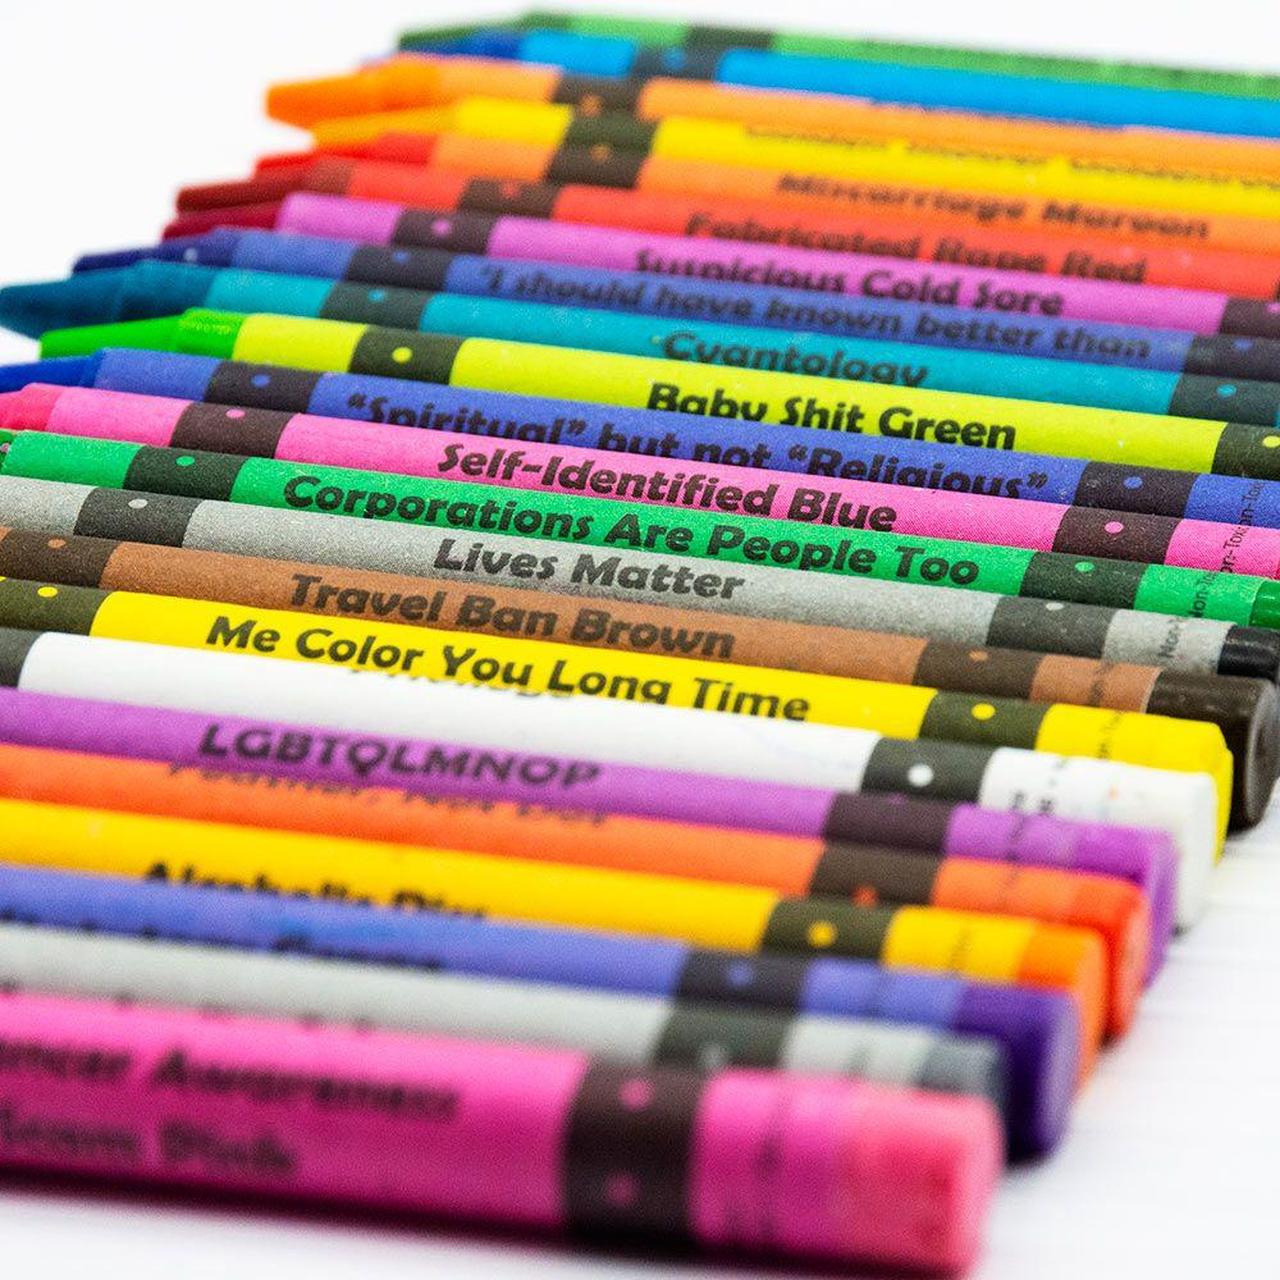 Offensive Crayons | Porn Pack | 12pc Display